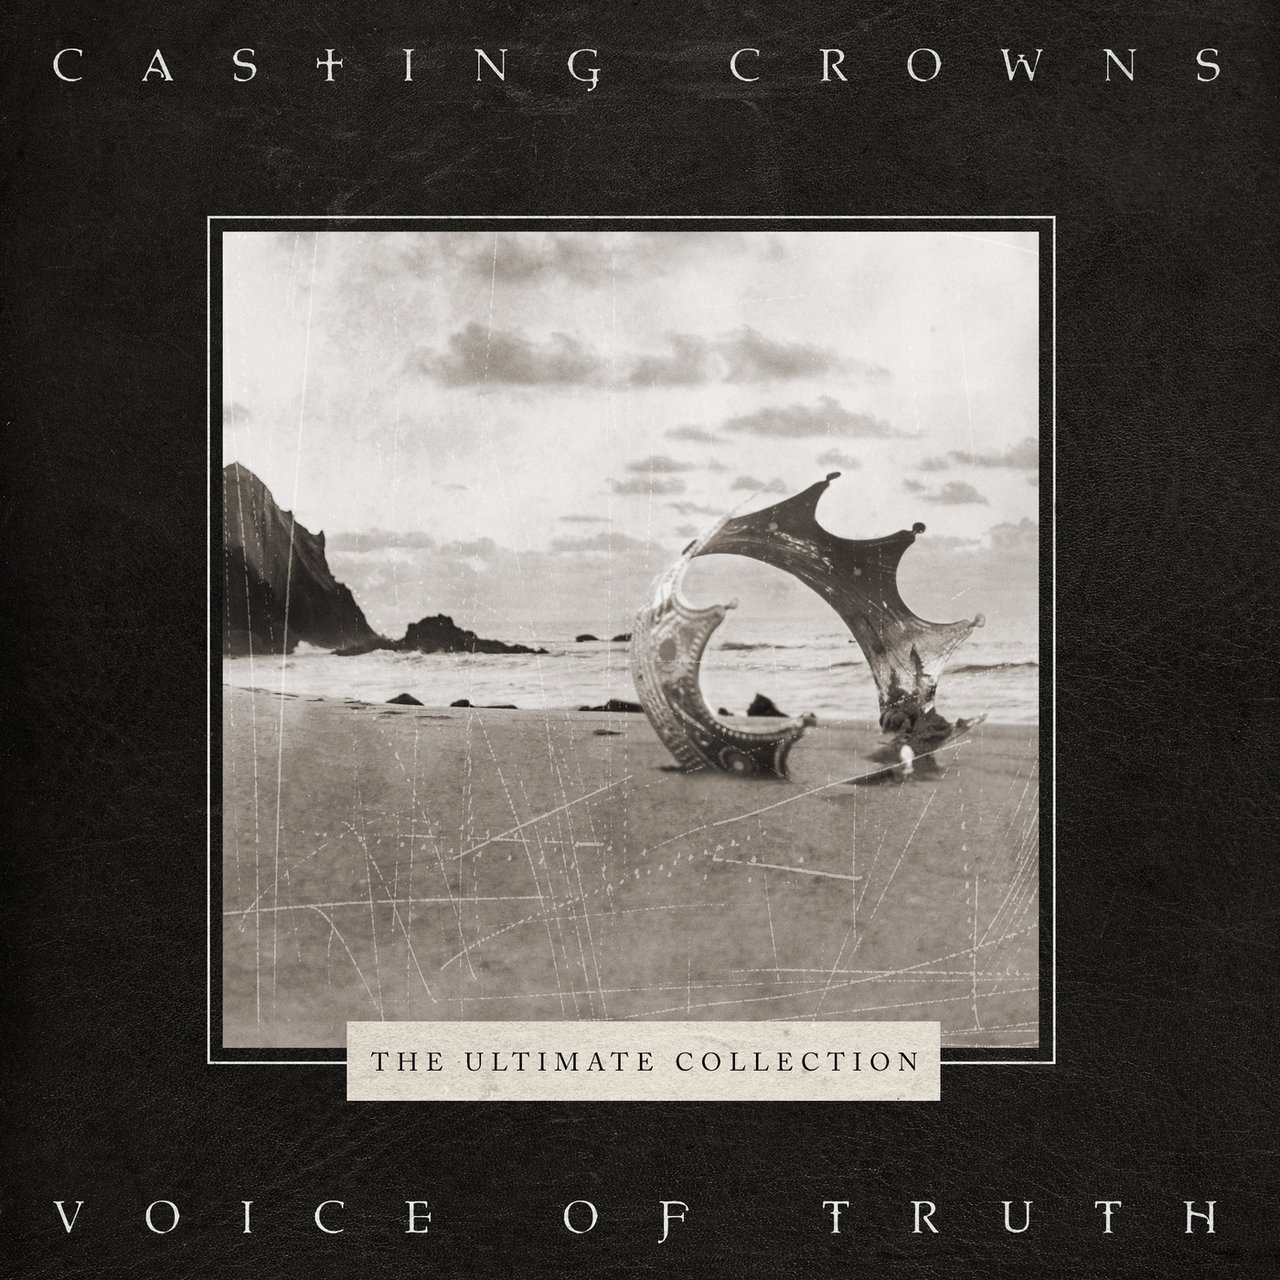 Art for Voice Of Truth by Casting Crowns